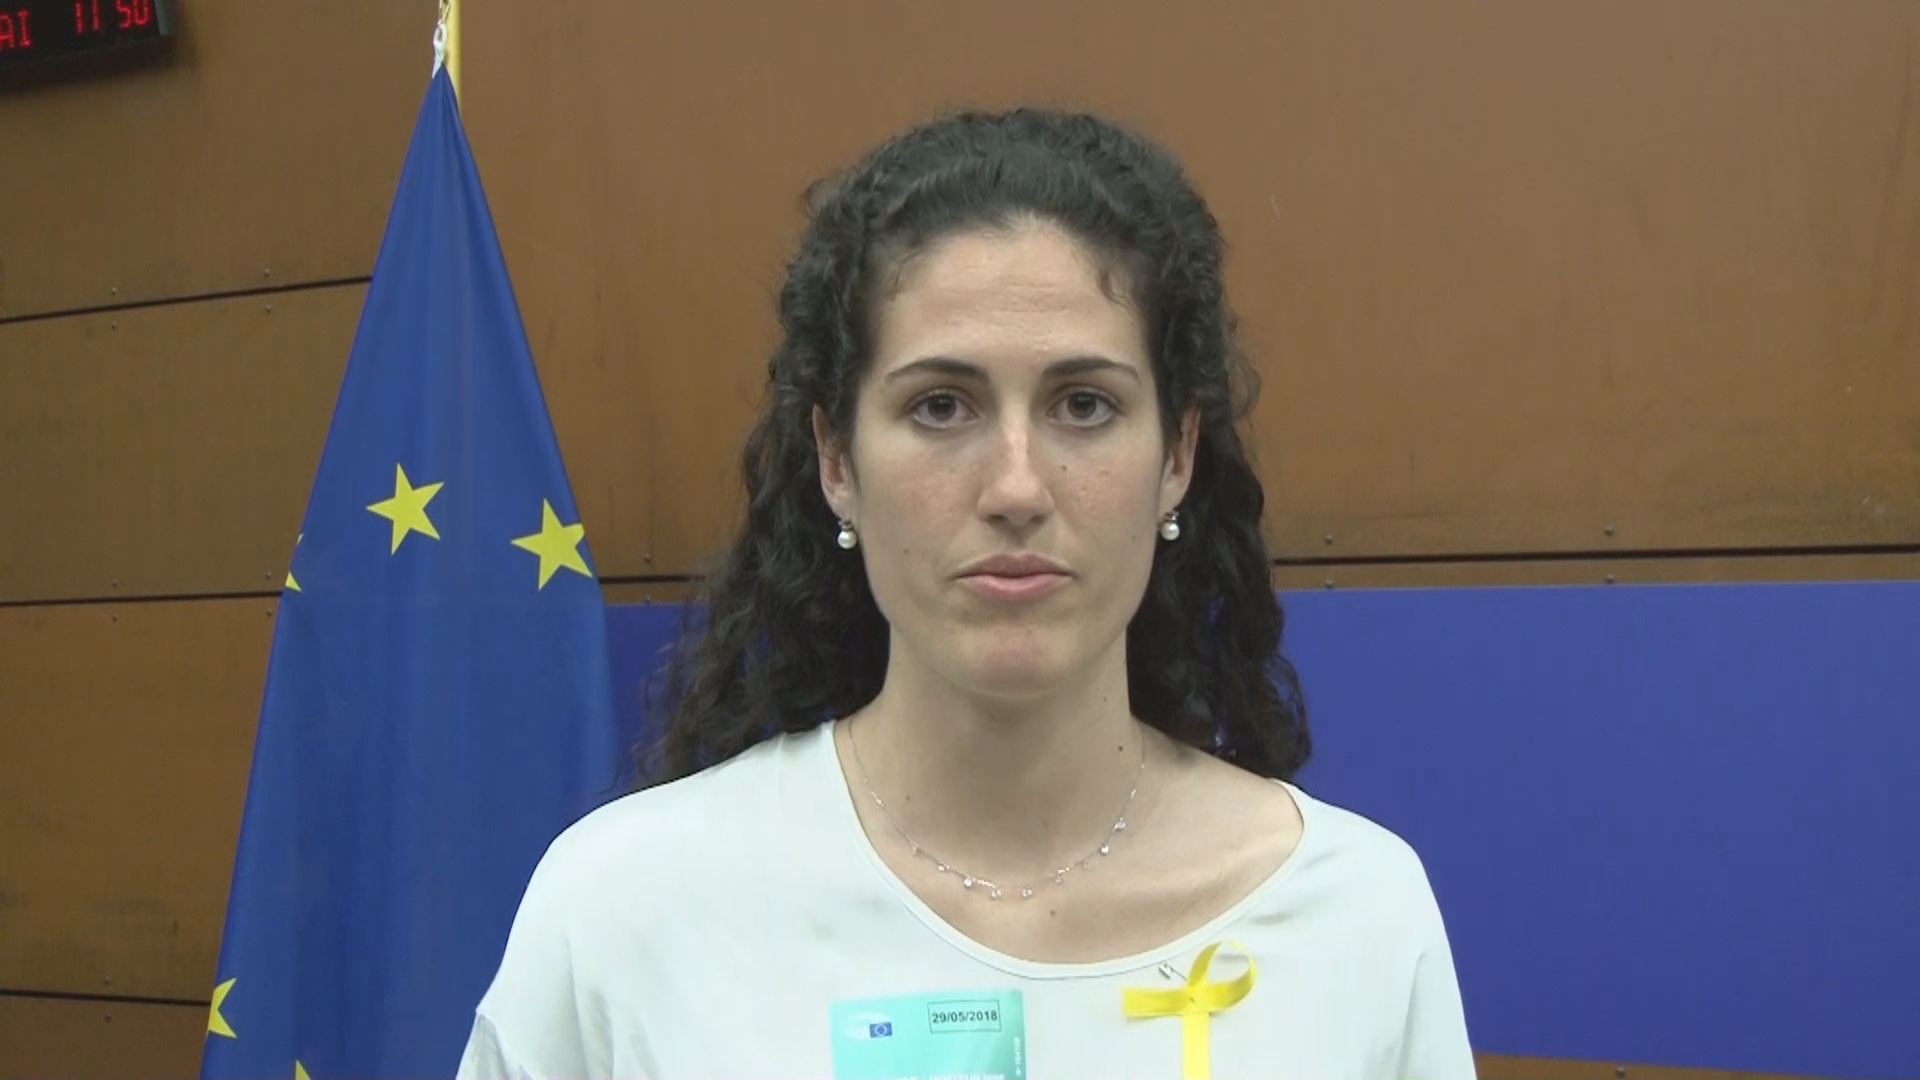 Anna Forn in the European Parliament, Strasbourg on July 29, 2018 (by ACN)